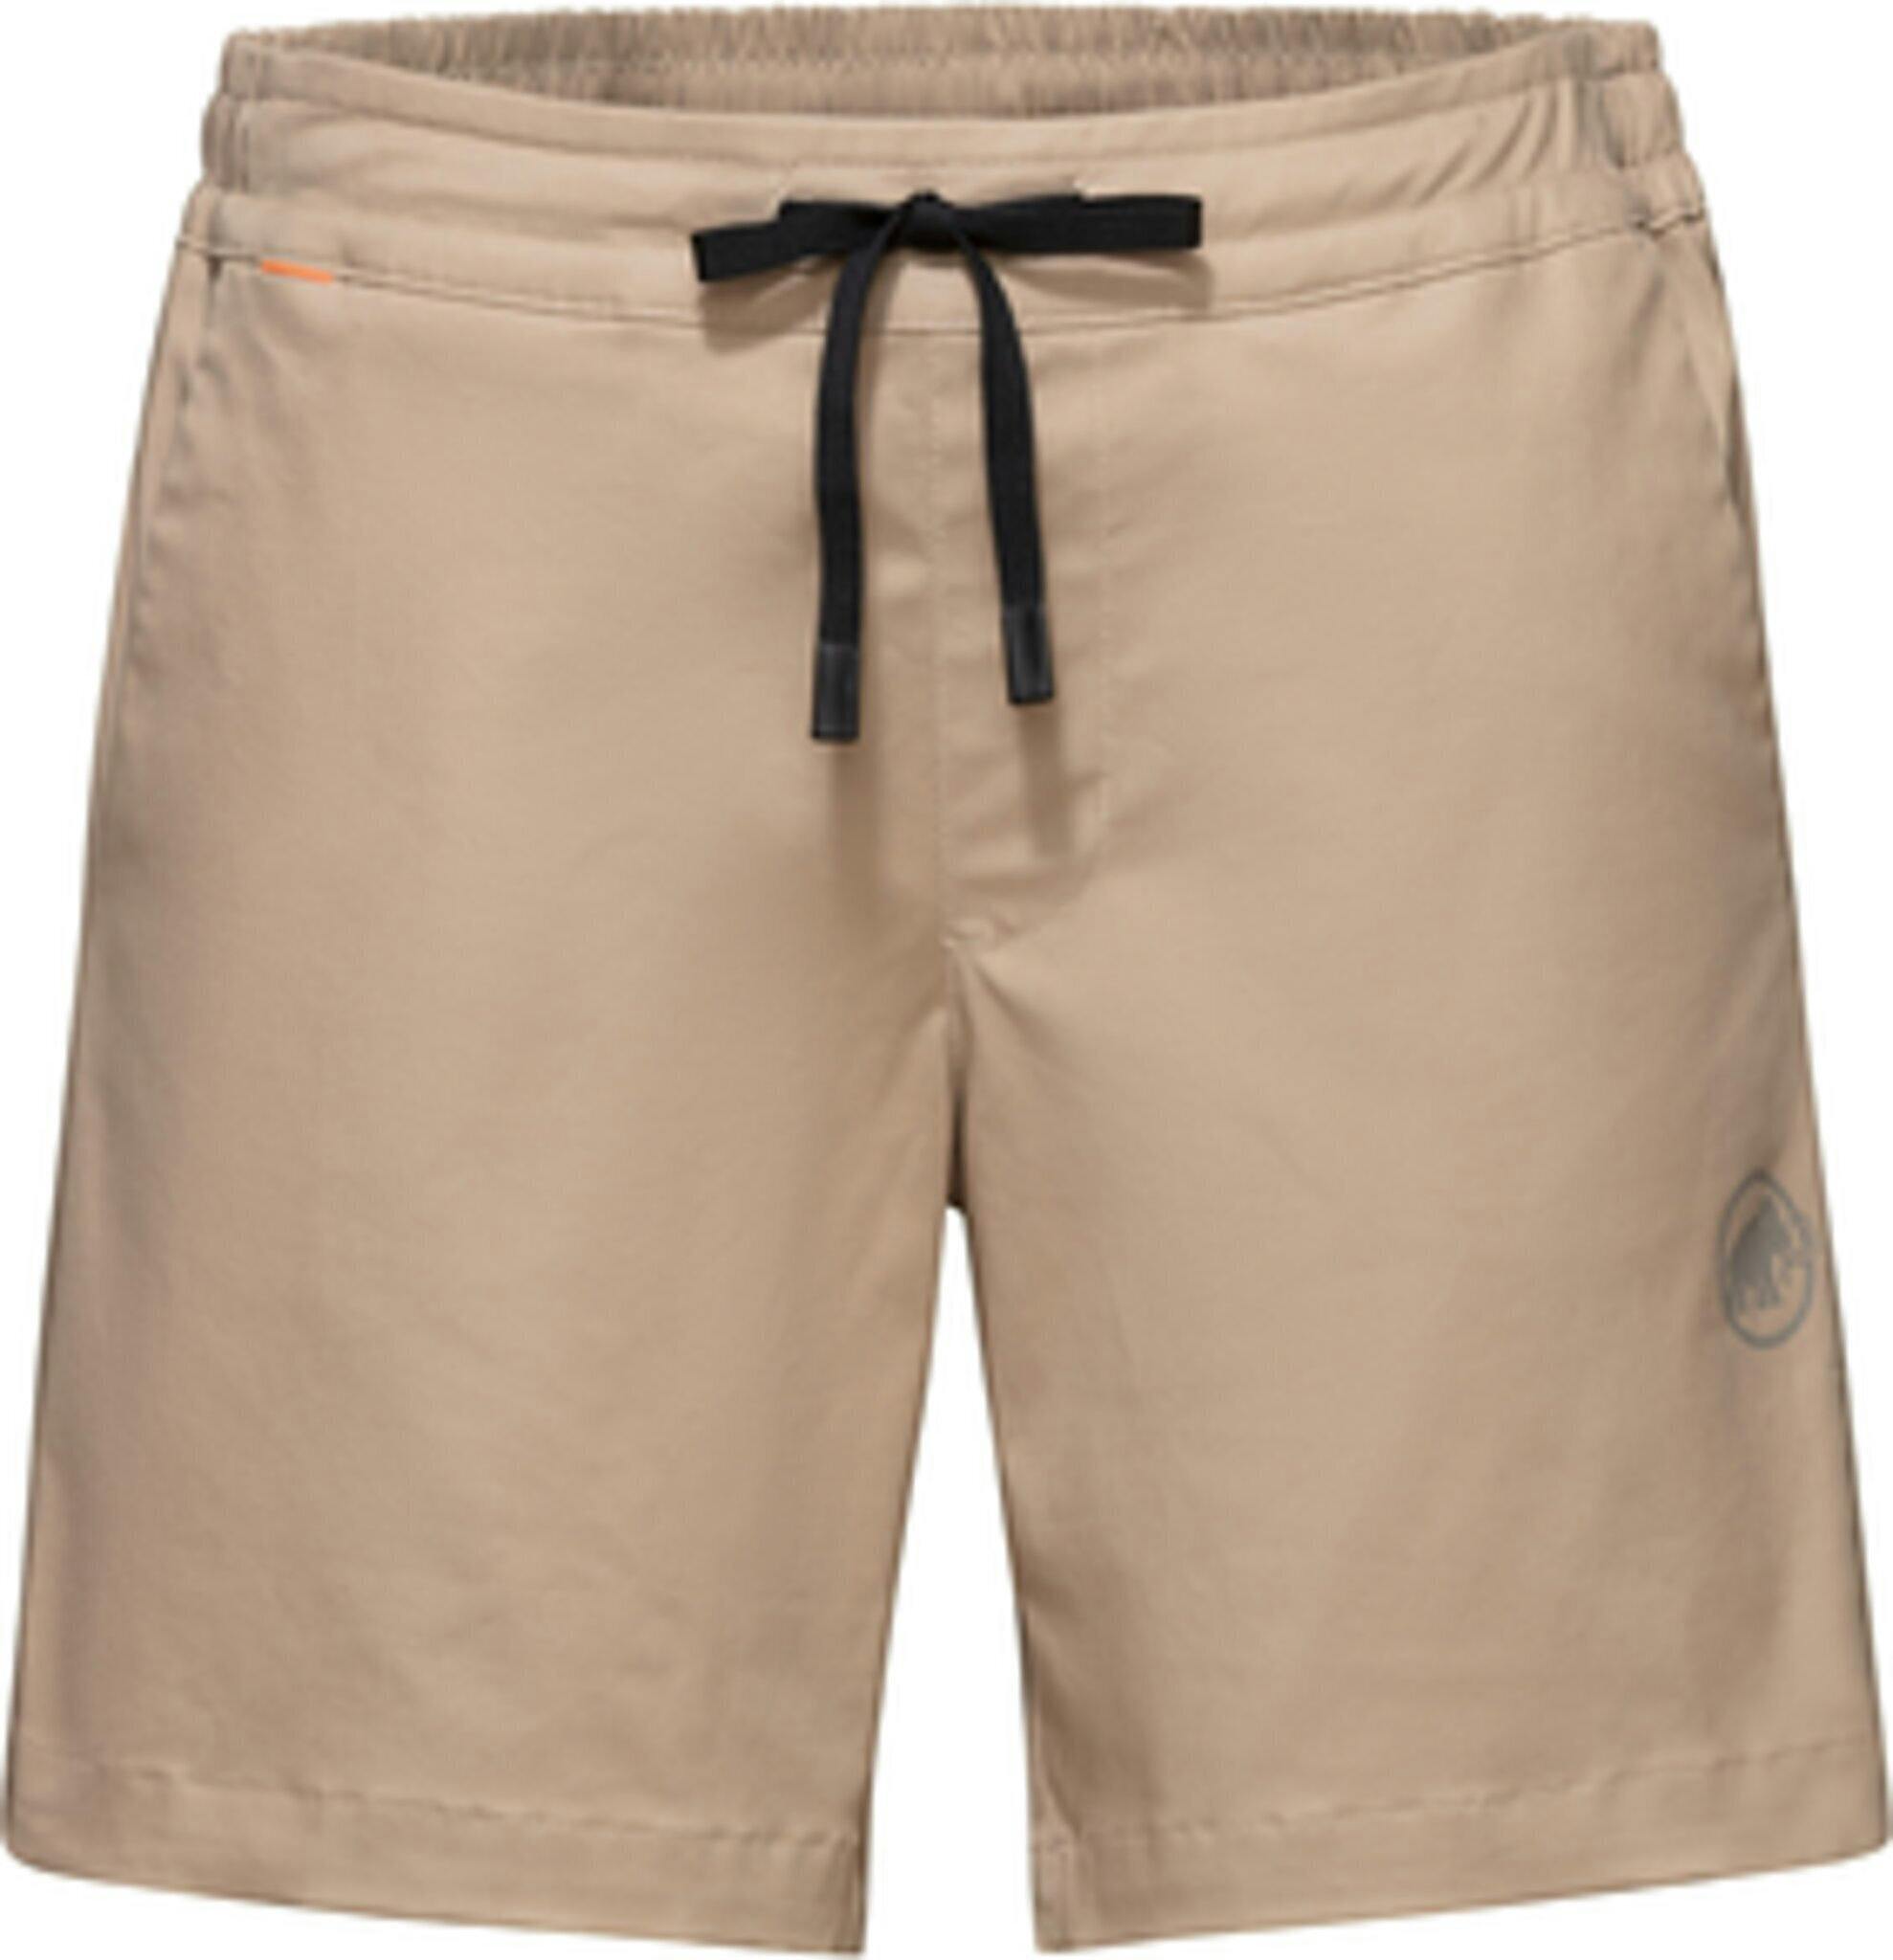 Product image for Camie Shorts - Women's